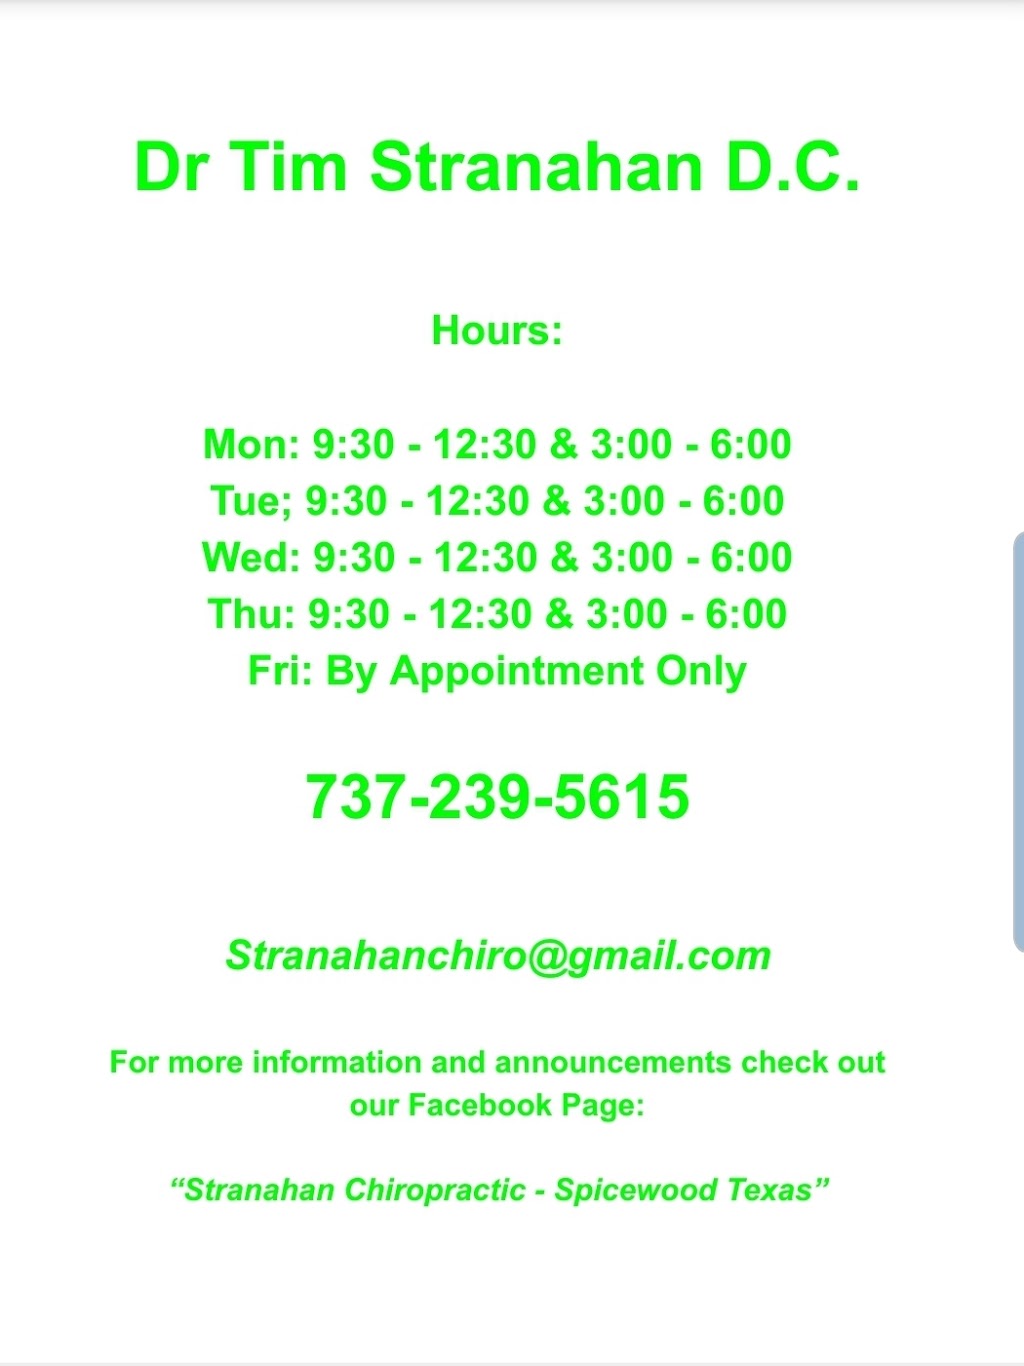 Stranahan Chiropractic - Spicewood Texas | 22800 State Hwy 71 W, Spicewood, TX 78669, USA | Phone: (737) 239-5615